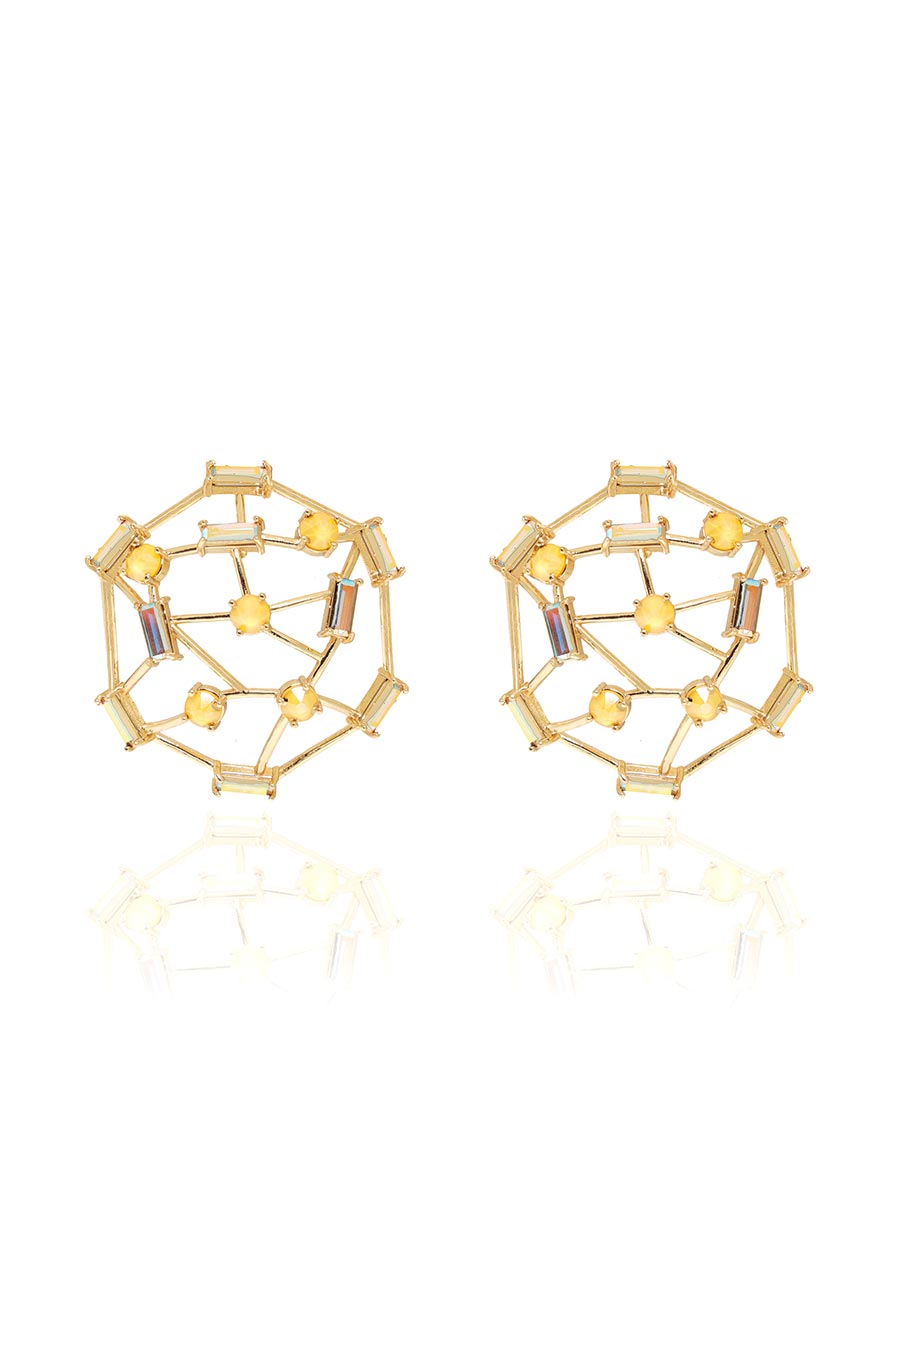 Candy Floss - Yellow Swarovski Cage Stud Earrings